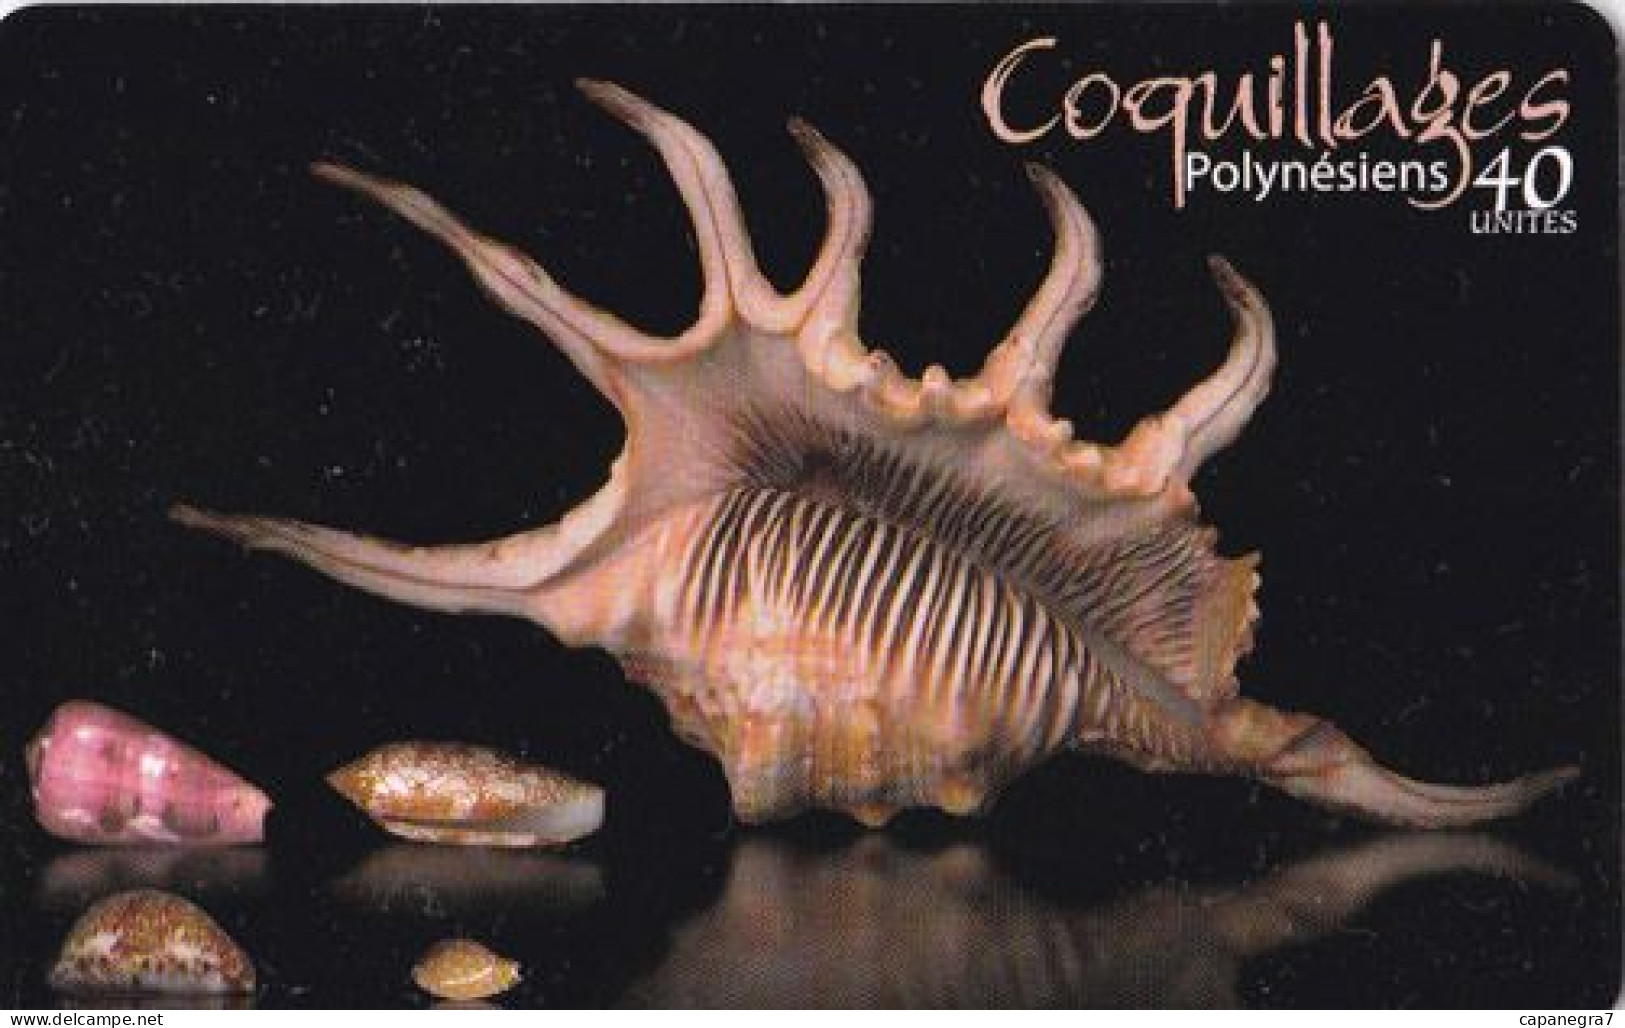 Coquillages Polynésiens, FP159,  French Polynesia - French Polynesia